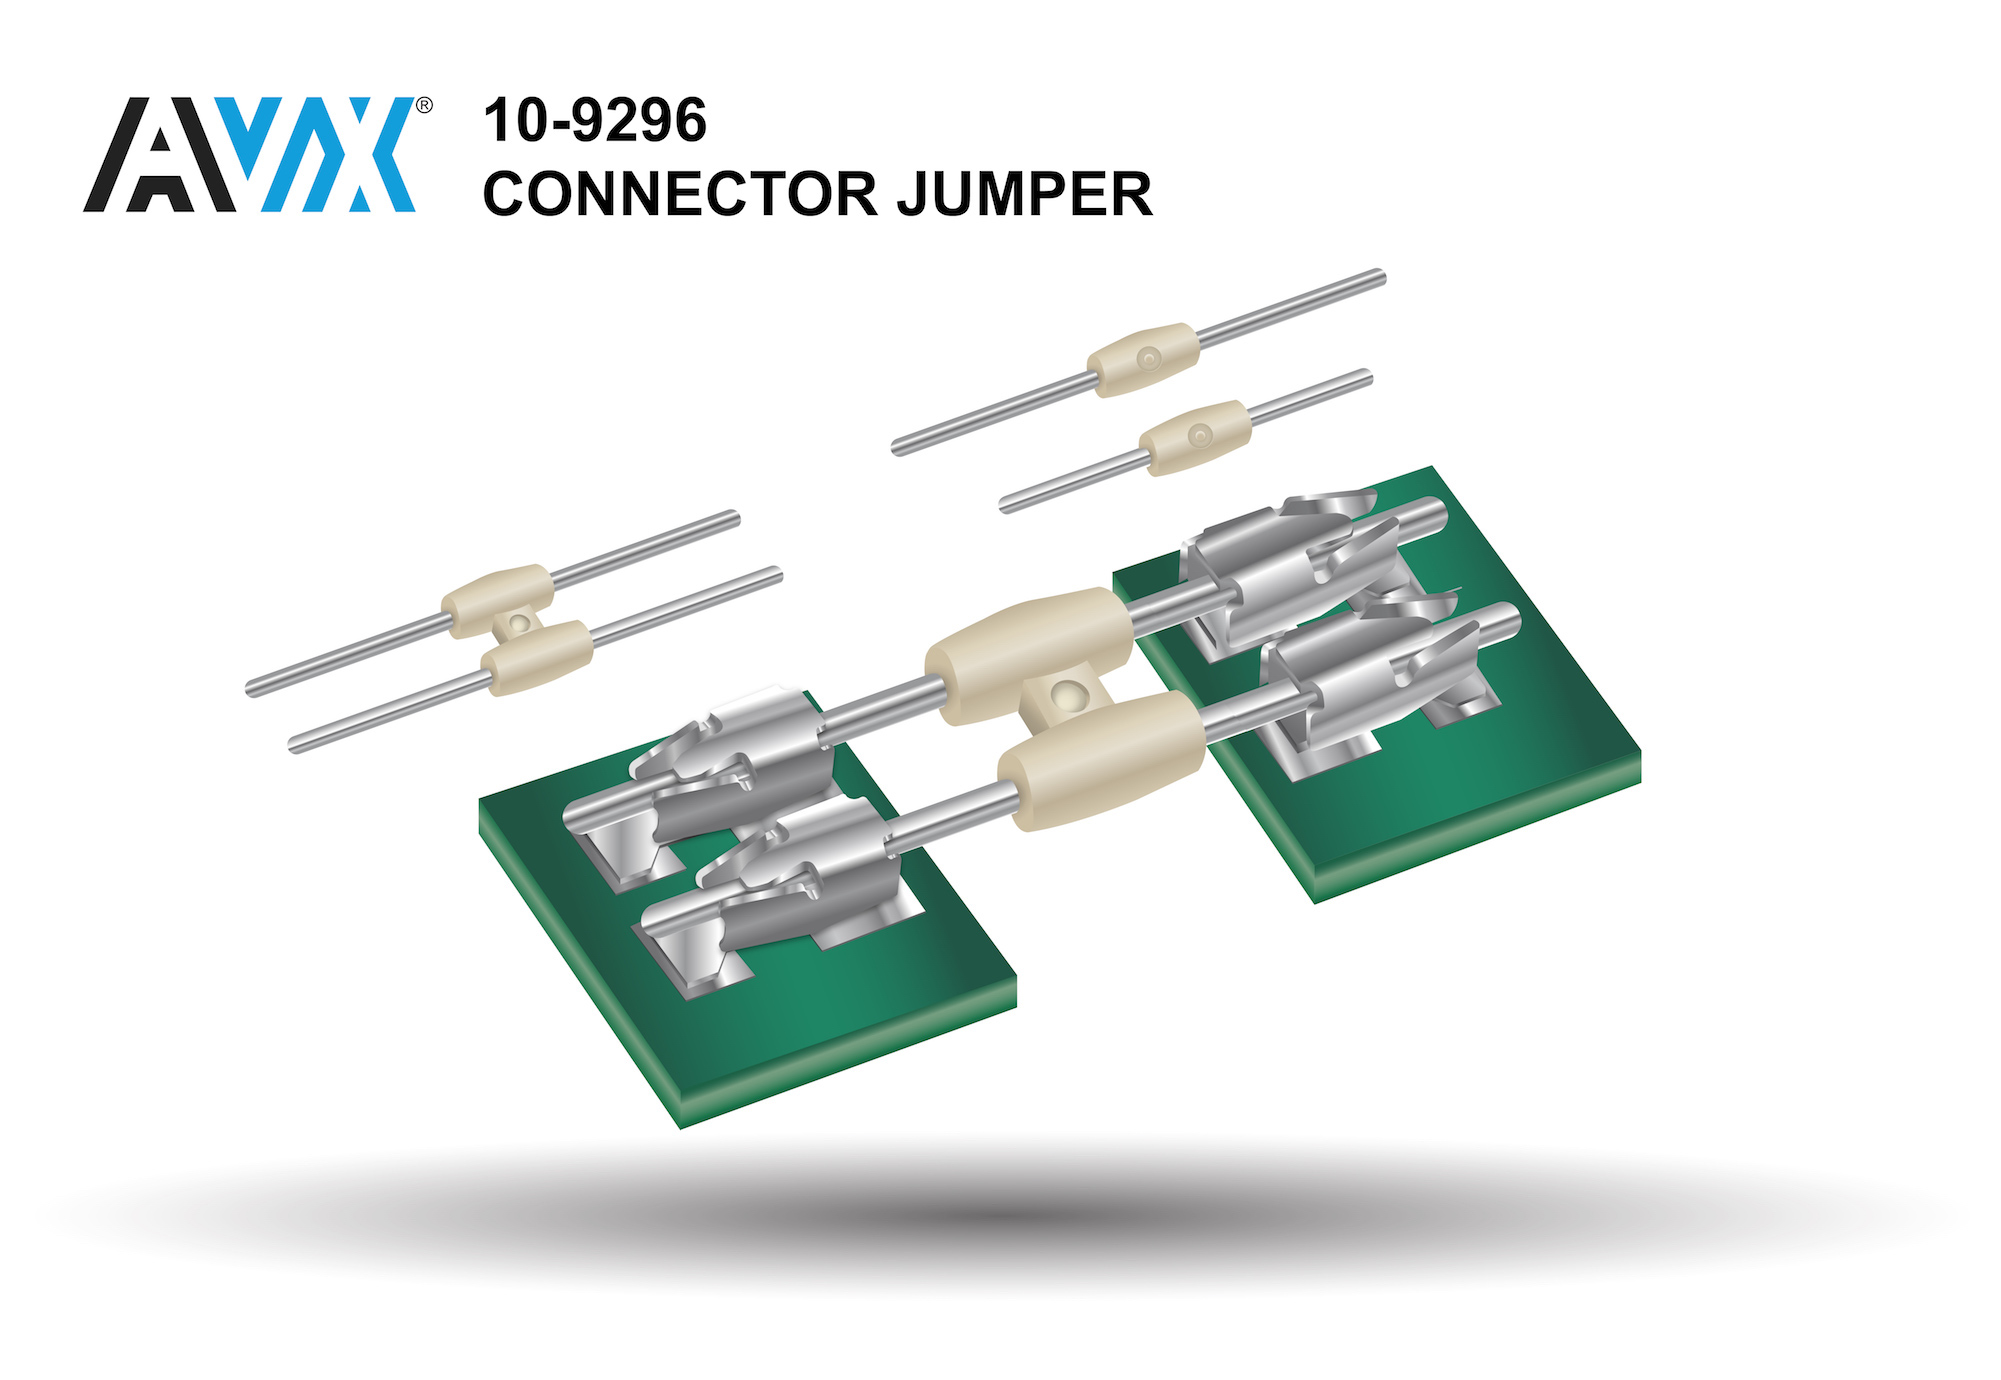 Two-Position BTB Pin Jumpers Designed for SSL & Industrial Applications